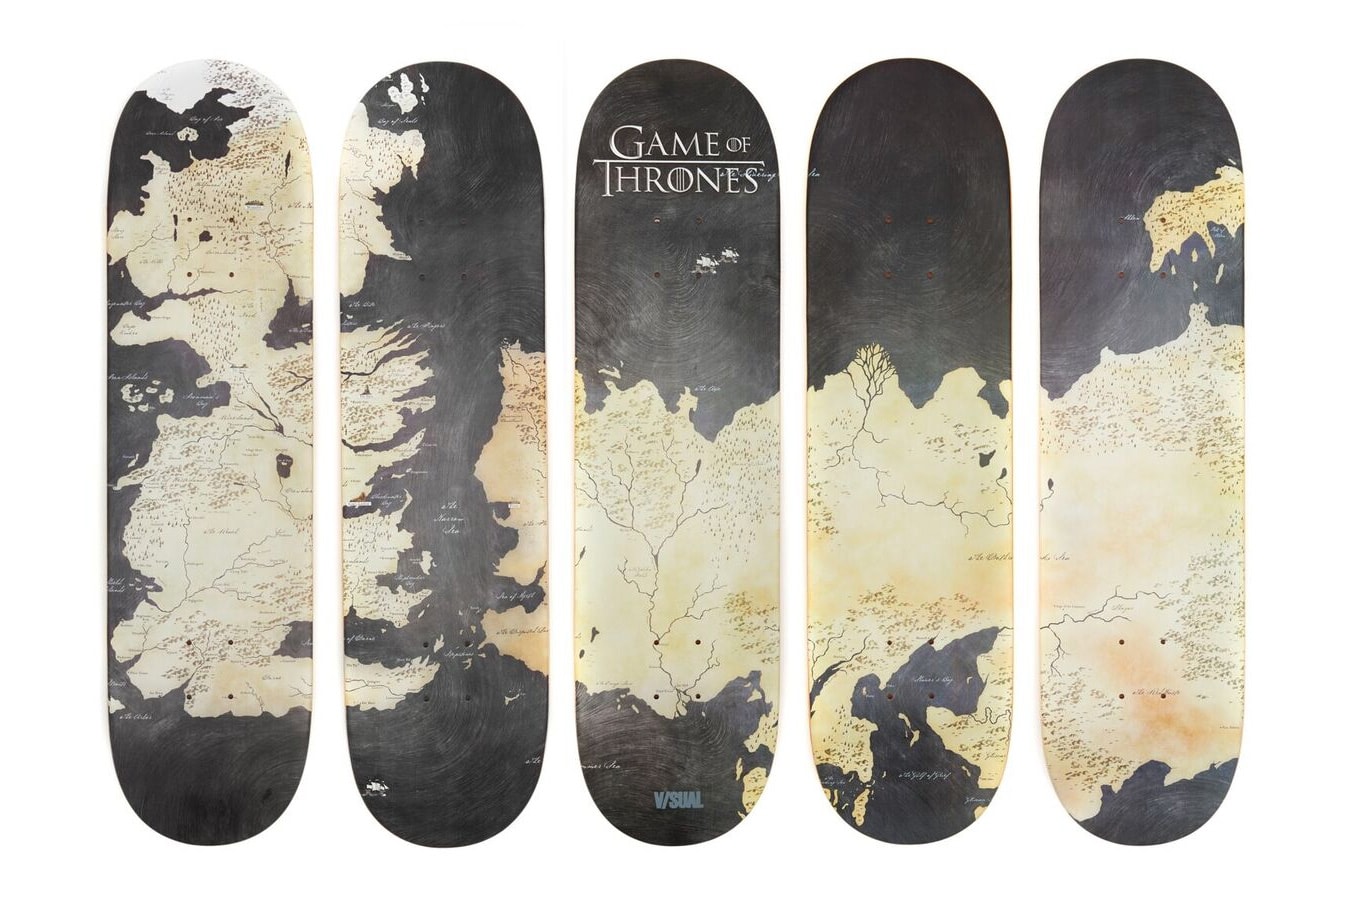 V/SUAL Rep the Realm Skate Deck Westeros Map Game of Thrones